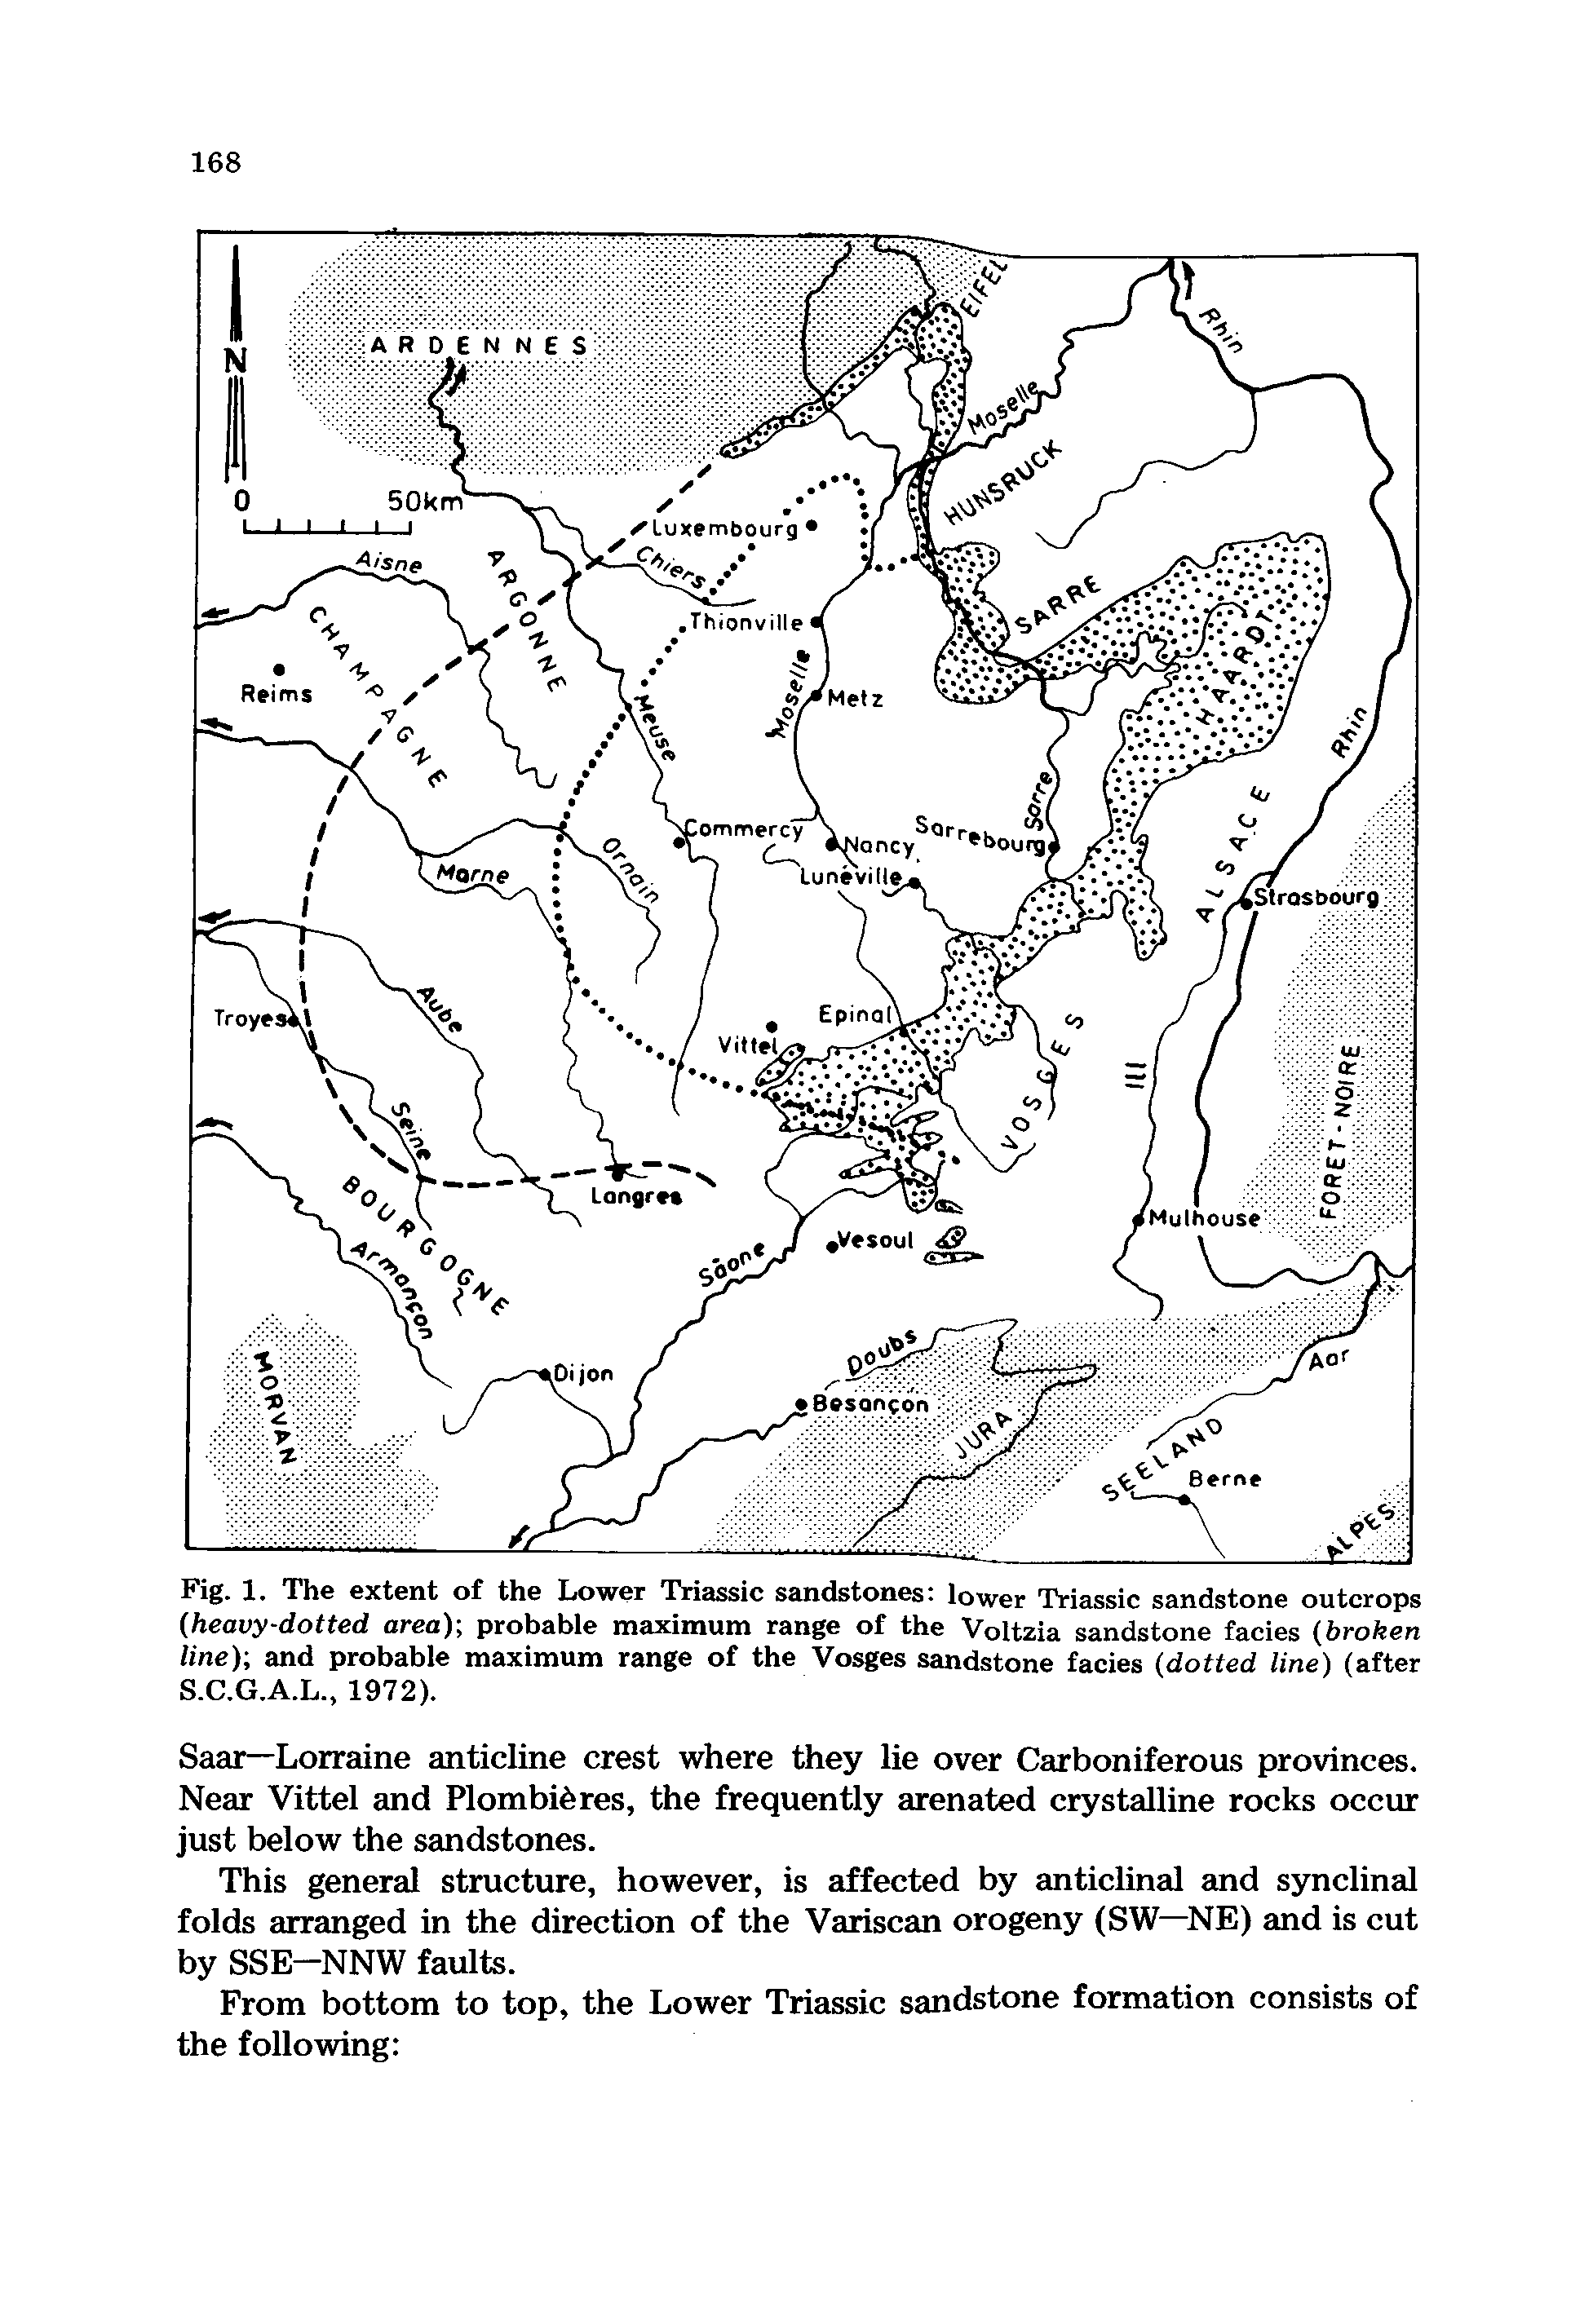 Fig. 1. The extent of the Lower Triassic sandstones lower Triassic sandstone outcrops heavy-dotted area) probable maximum range of the Voltzia sandstone facies broken line) and probable maximum range of the Vosges sandstone facies dotted line) (after S.C.G.A.L., 1972).